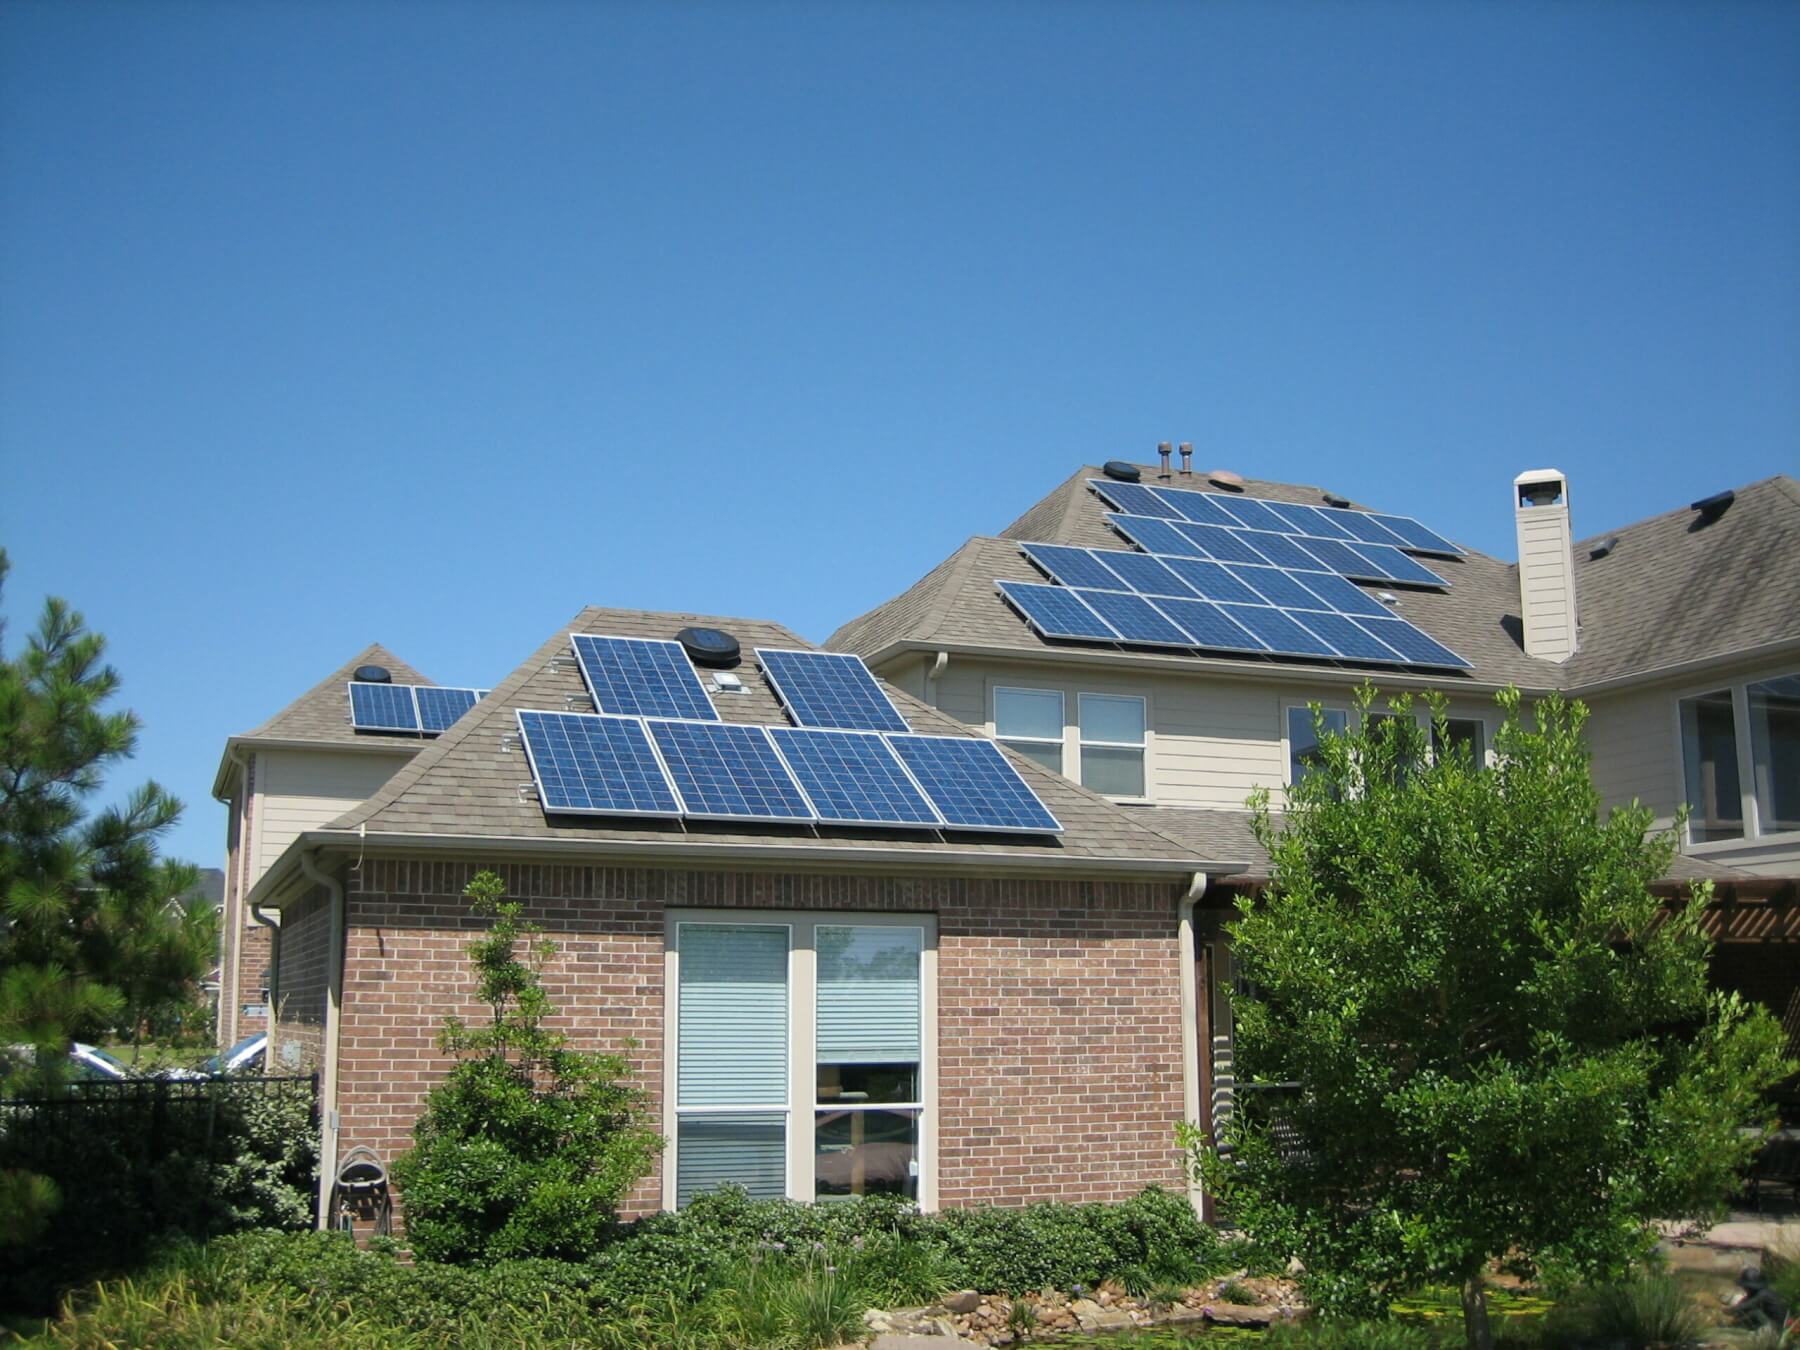 Large house with solar panels